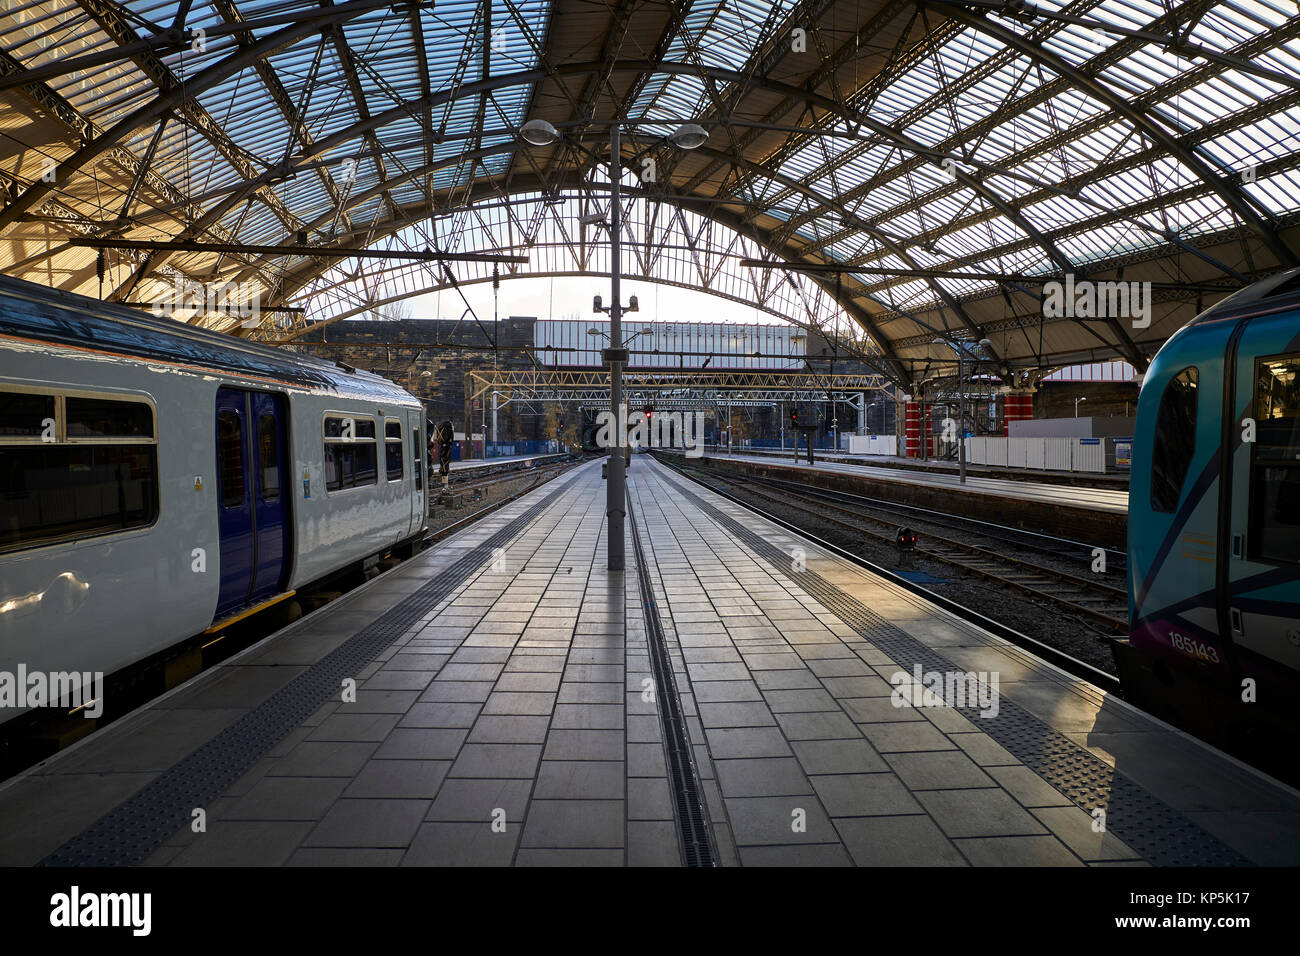 Liverpool Lime Street platform showing glass canopy Stock Photo